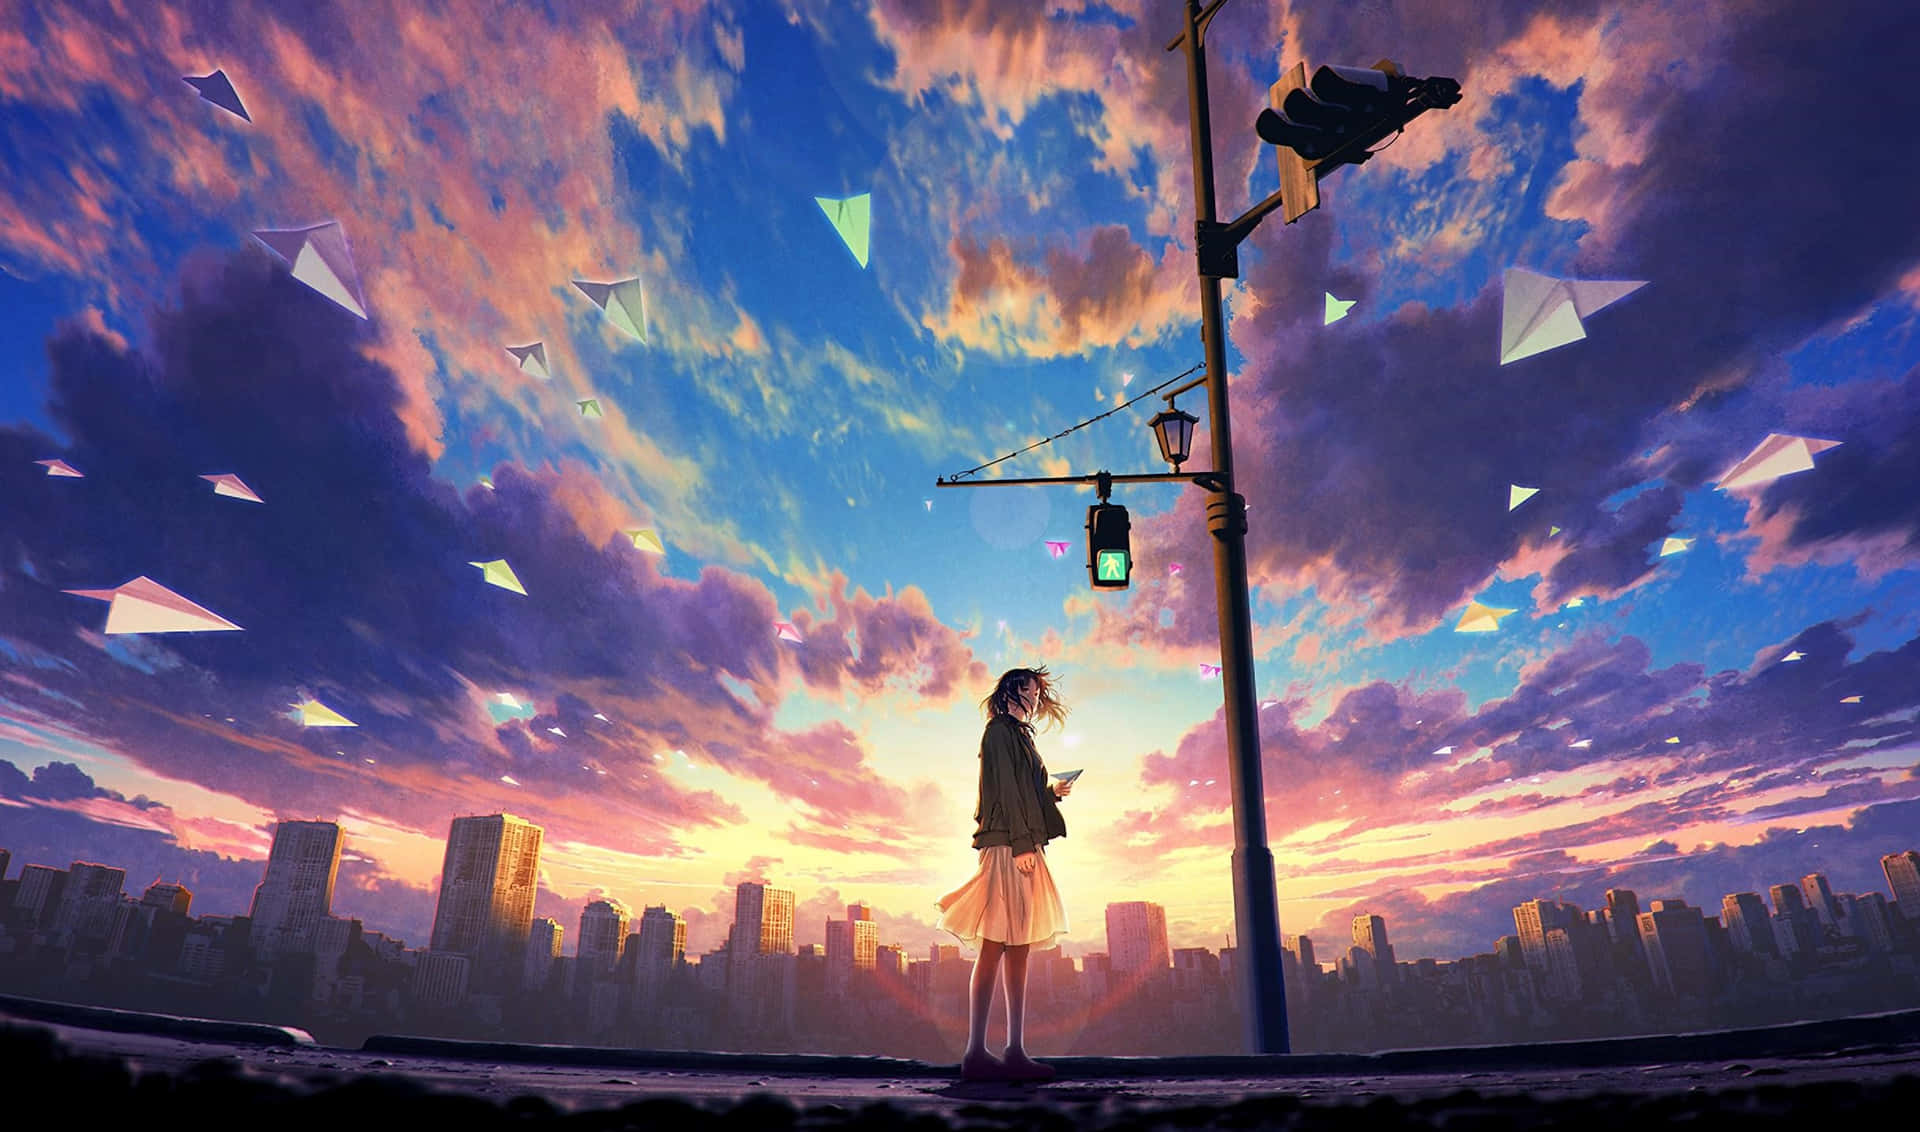 Adventure Awaits In This Cute Anime Scenery Background